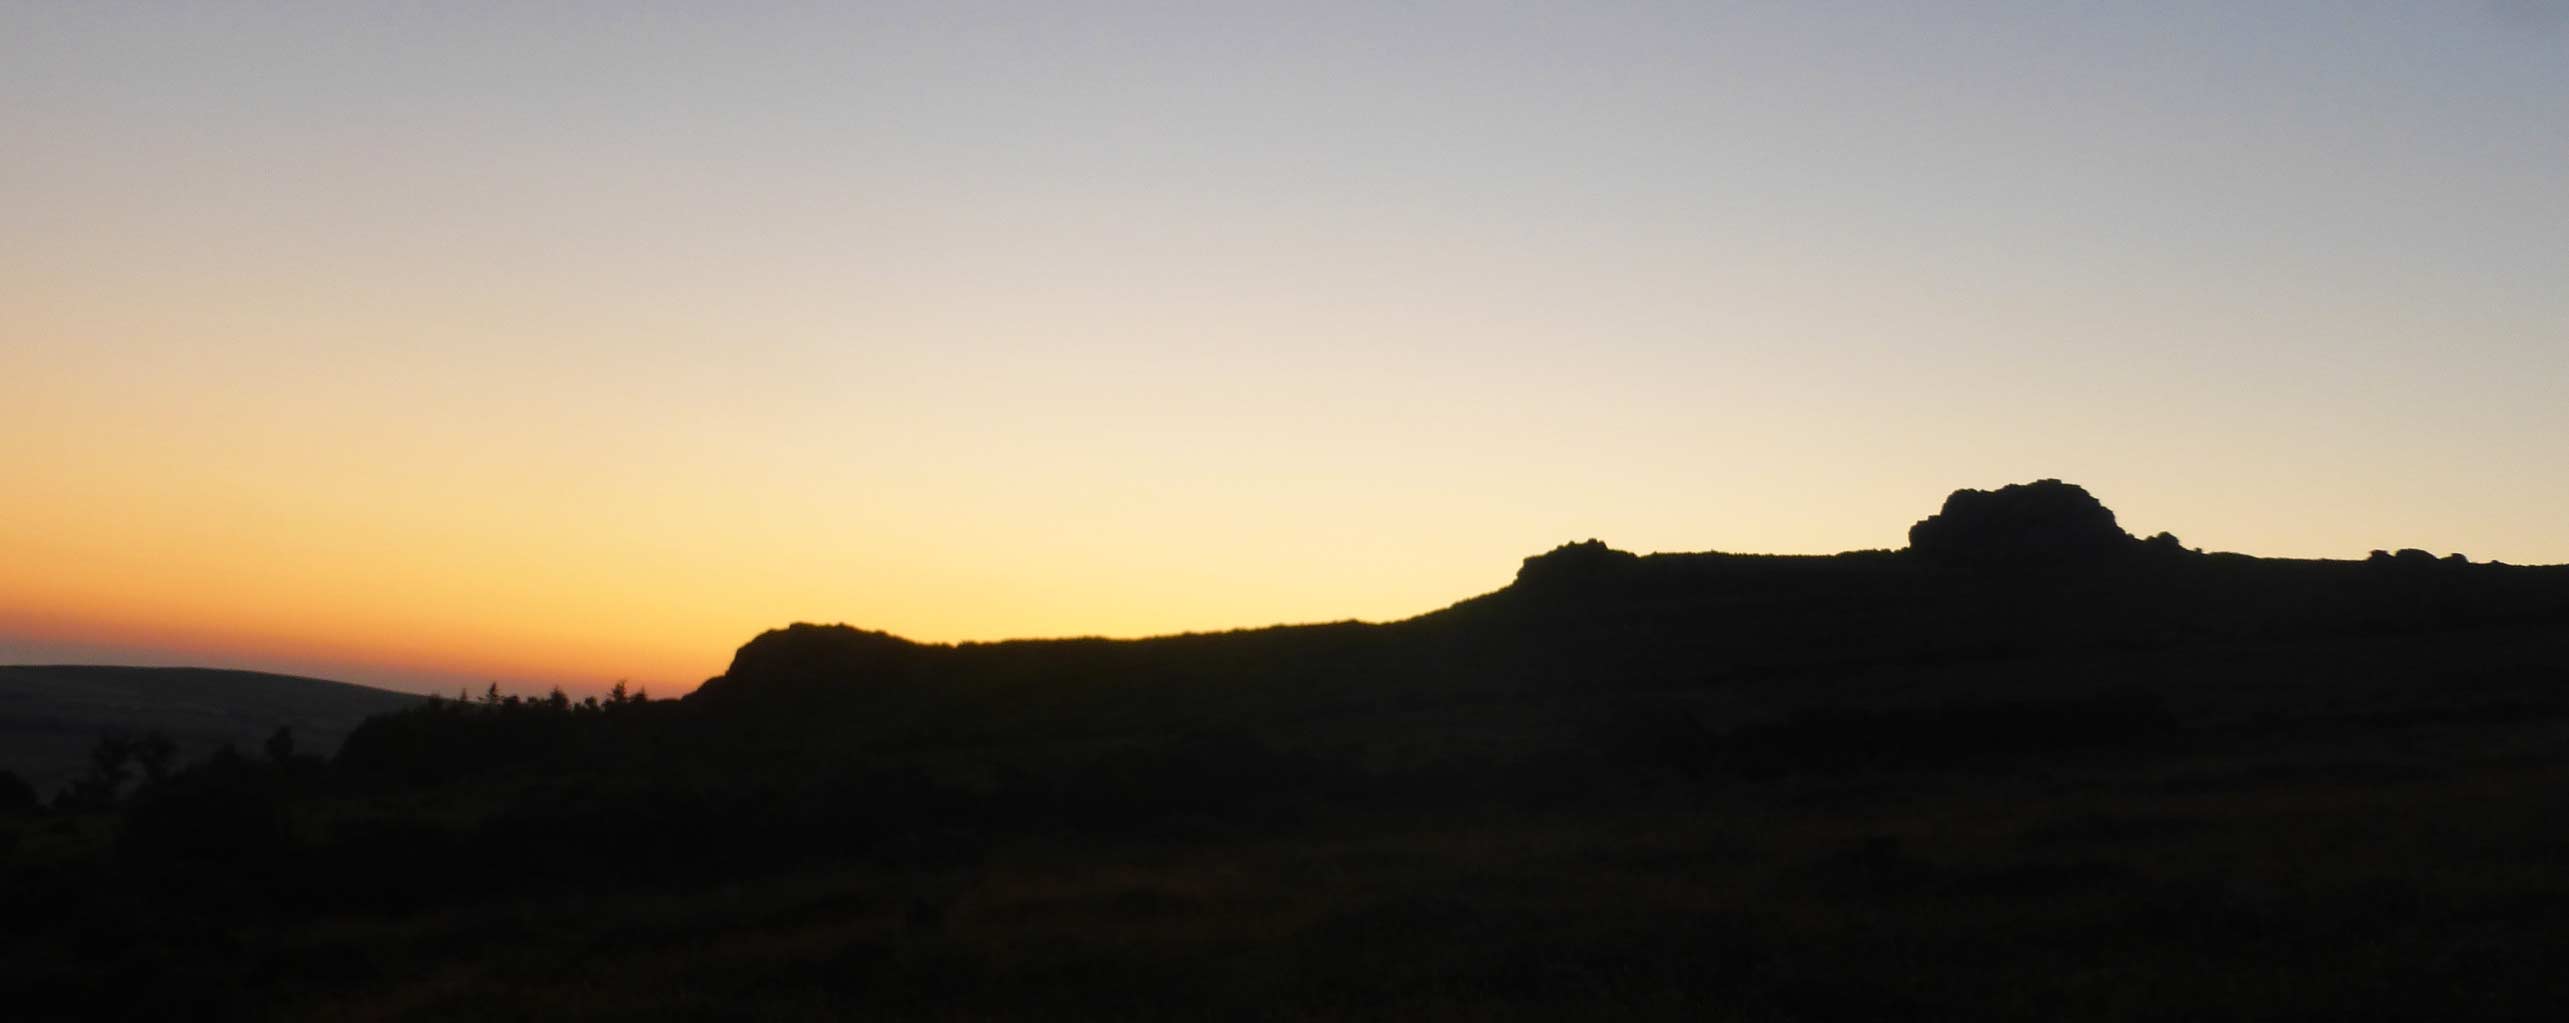 Sunrise view of the Sleeping Giant